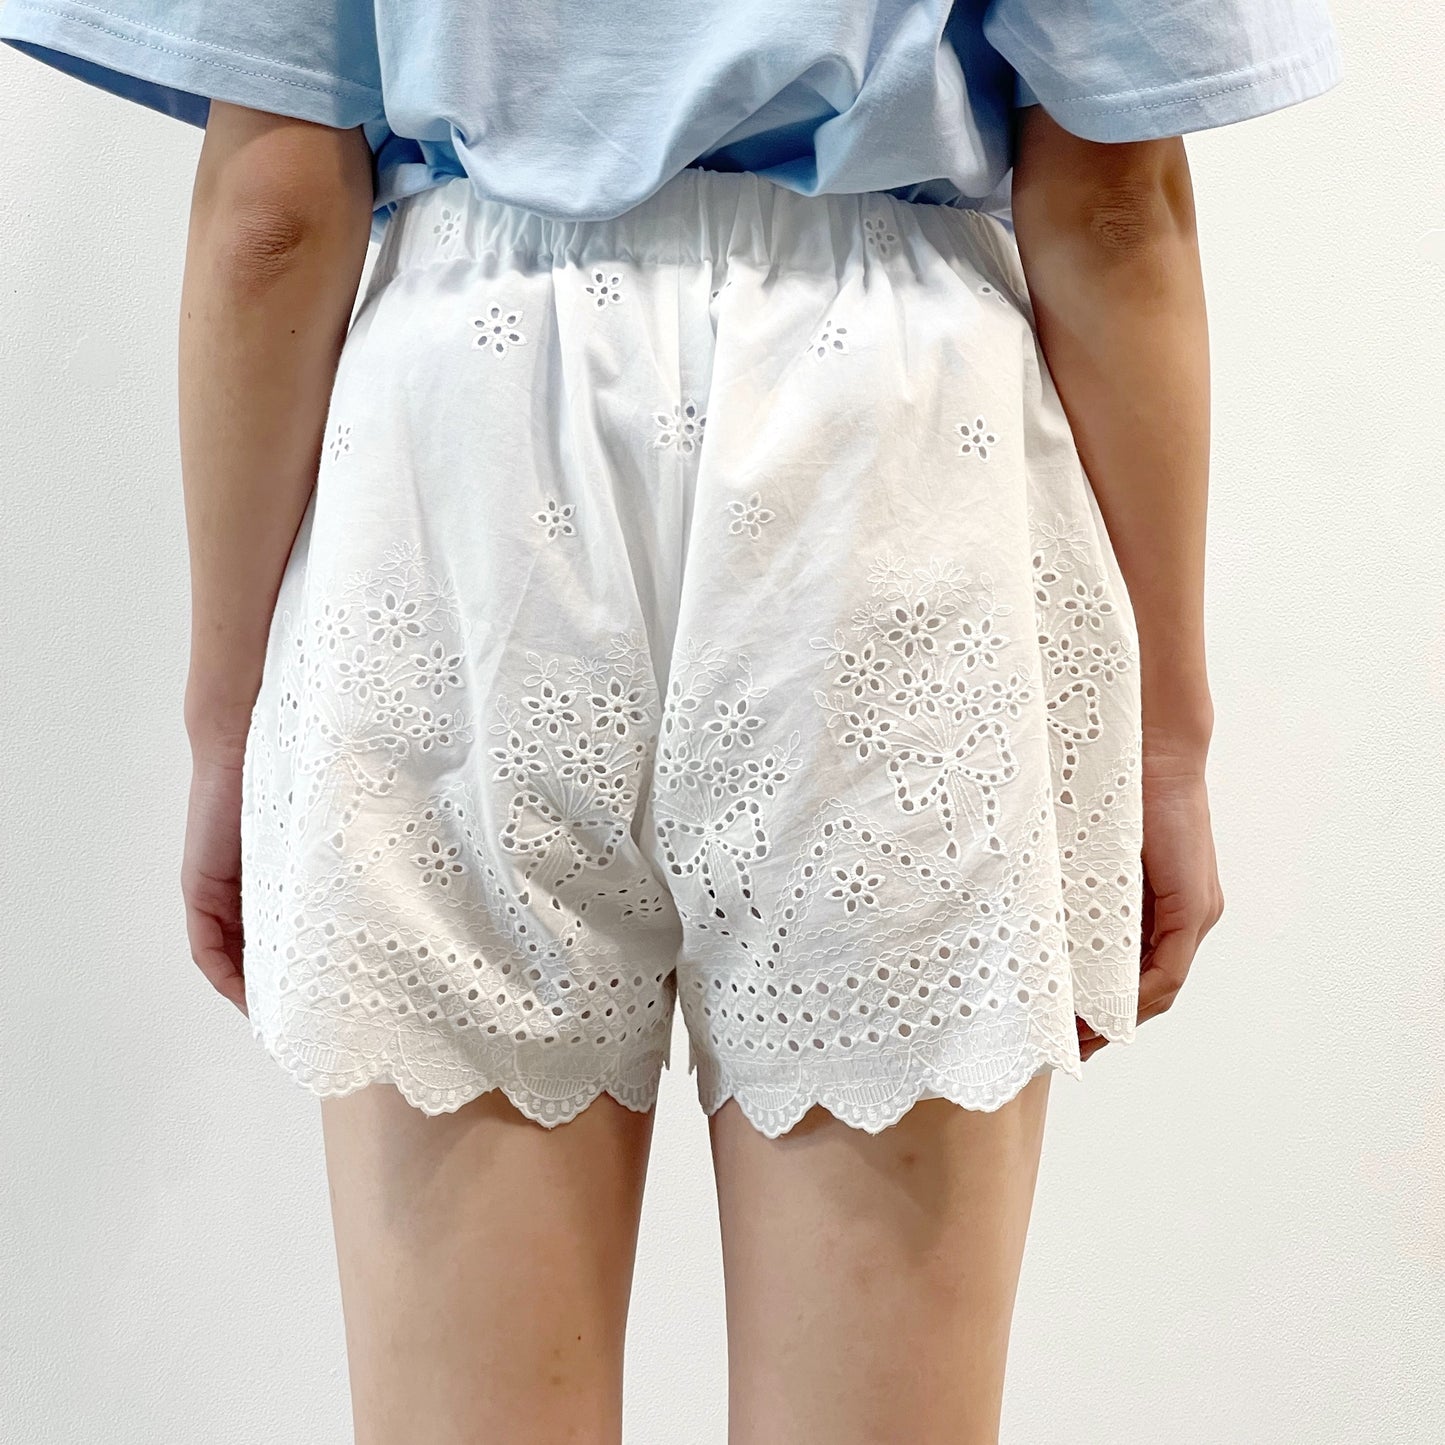 Love me or leave me shorts / White / レースショートパンツ